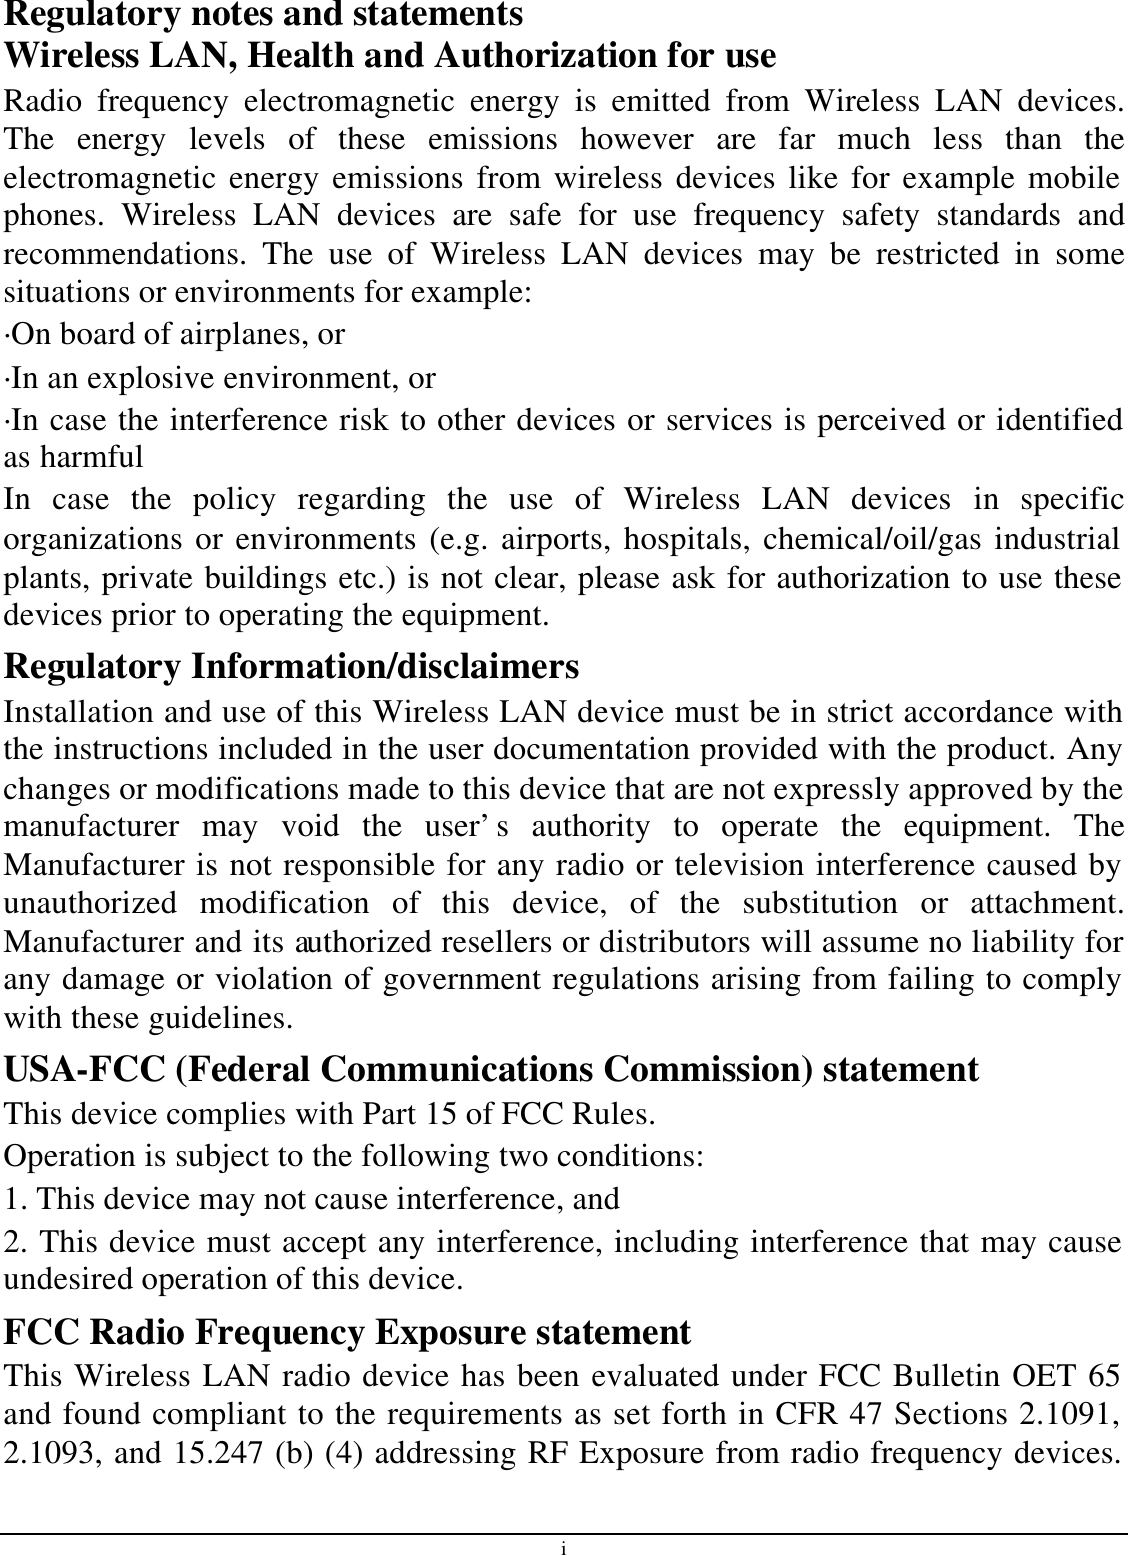 i Regulatory notes and statements Wireless LAN, Health and Authorization for use Radio frequency electromagnetic energy is emitted from Wireless LAN devices. The energy levels of these emissions however are far much less than the electromagnetic energy emissions from wireless devices like for example mobile phones. Wireless LAN devices are safe for use frequency safety standards and recommendations. The use of Wireless LAN devices may be restricted in some situations or environments for example: ·On board of airplanes, or ·In an explosive environment, or ·In case the interference risk to other devices or services is perceived or identified as harmful In case the policy regarding the use of Wireless LAN devices in specific organizations or environments (e.g. airports, hospitals, chemical/oil/gas industrial plants, private buildings etc.) is not clear, please ask for authorization to use these devices prior to operating the equipment. Regulatory Information/disclaimers Installation and use of this Wireless LAN device must be in strict accordance with the instructions included in the user documentation provided with the product. Any changes or modifications made to this device that are not expressly approved by the manufacturer may void the user’s authority to operate the equipment. The Manufacturer is not responsible for any radio or television interference caused by unauthorized modification of this device, of the substitution or attachment. Manufacturer and its authorized resellers or distributors will assume no liability for any damage or violation of government regulations arising from failing to comply with these guidelines. USA-FCC (Federal Communications Commission) statement This device complies with Part 15 of FCC Rules. Operation is subject to the following two conditions: 1. This device may not cause interference, and 2. This device must accept any interference, including interference that may cause undesired operation of this device. FCC Radio Frequency Exposure statement This Wireless LAN radio device has been evaluated under FCC Bulletin OET 65 and found compliant to the requirements as set forth in CFR 47 Sections 2.1091, 2.1093, and 15.247 (b) (4) addressing RF Exposure from radio frequency devices. 